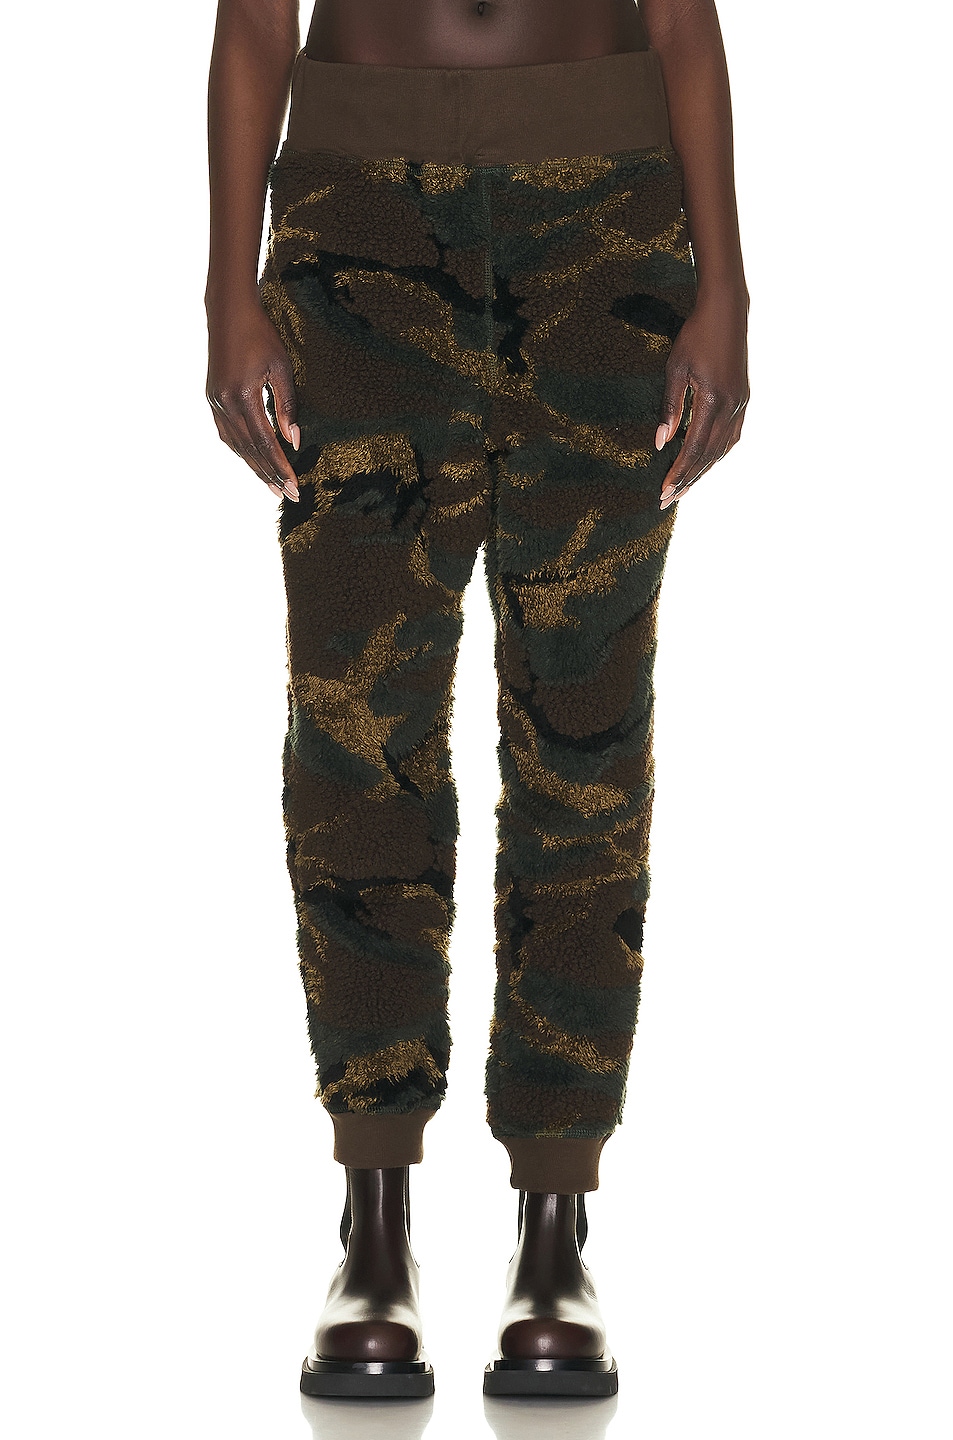 Image 1 of Camp High Sweatpants In Camo in Camo